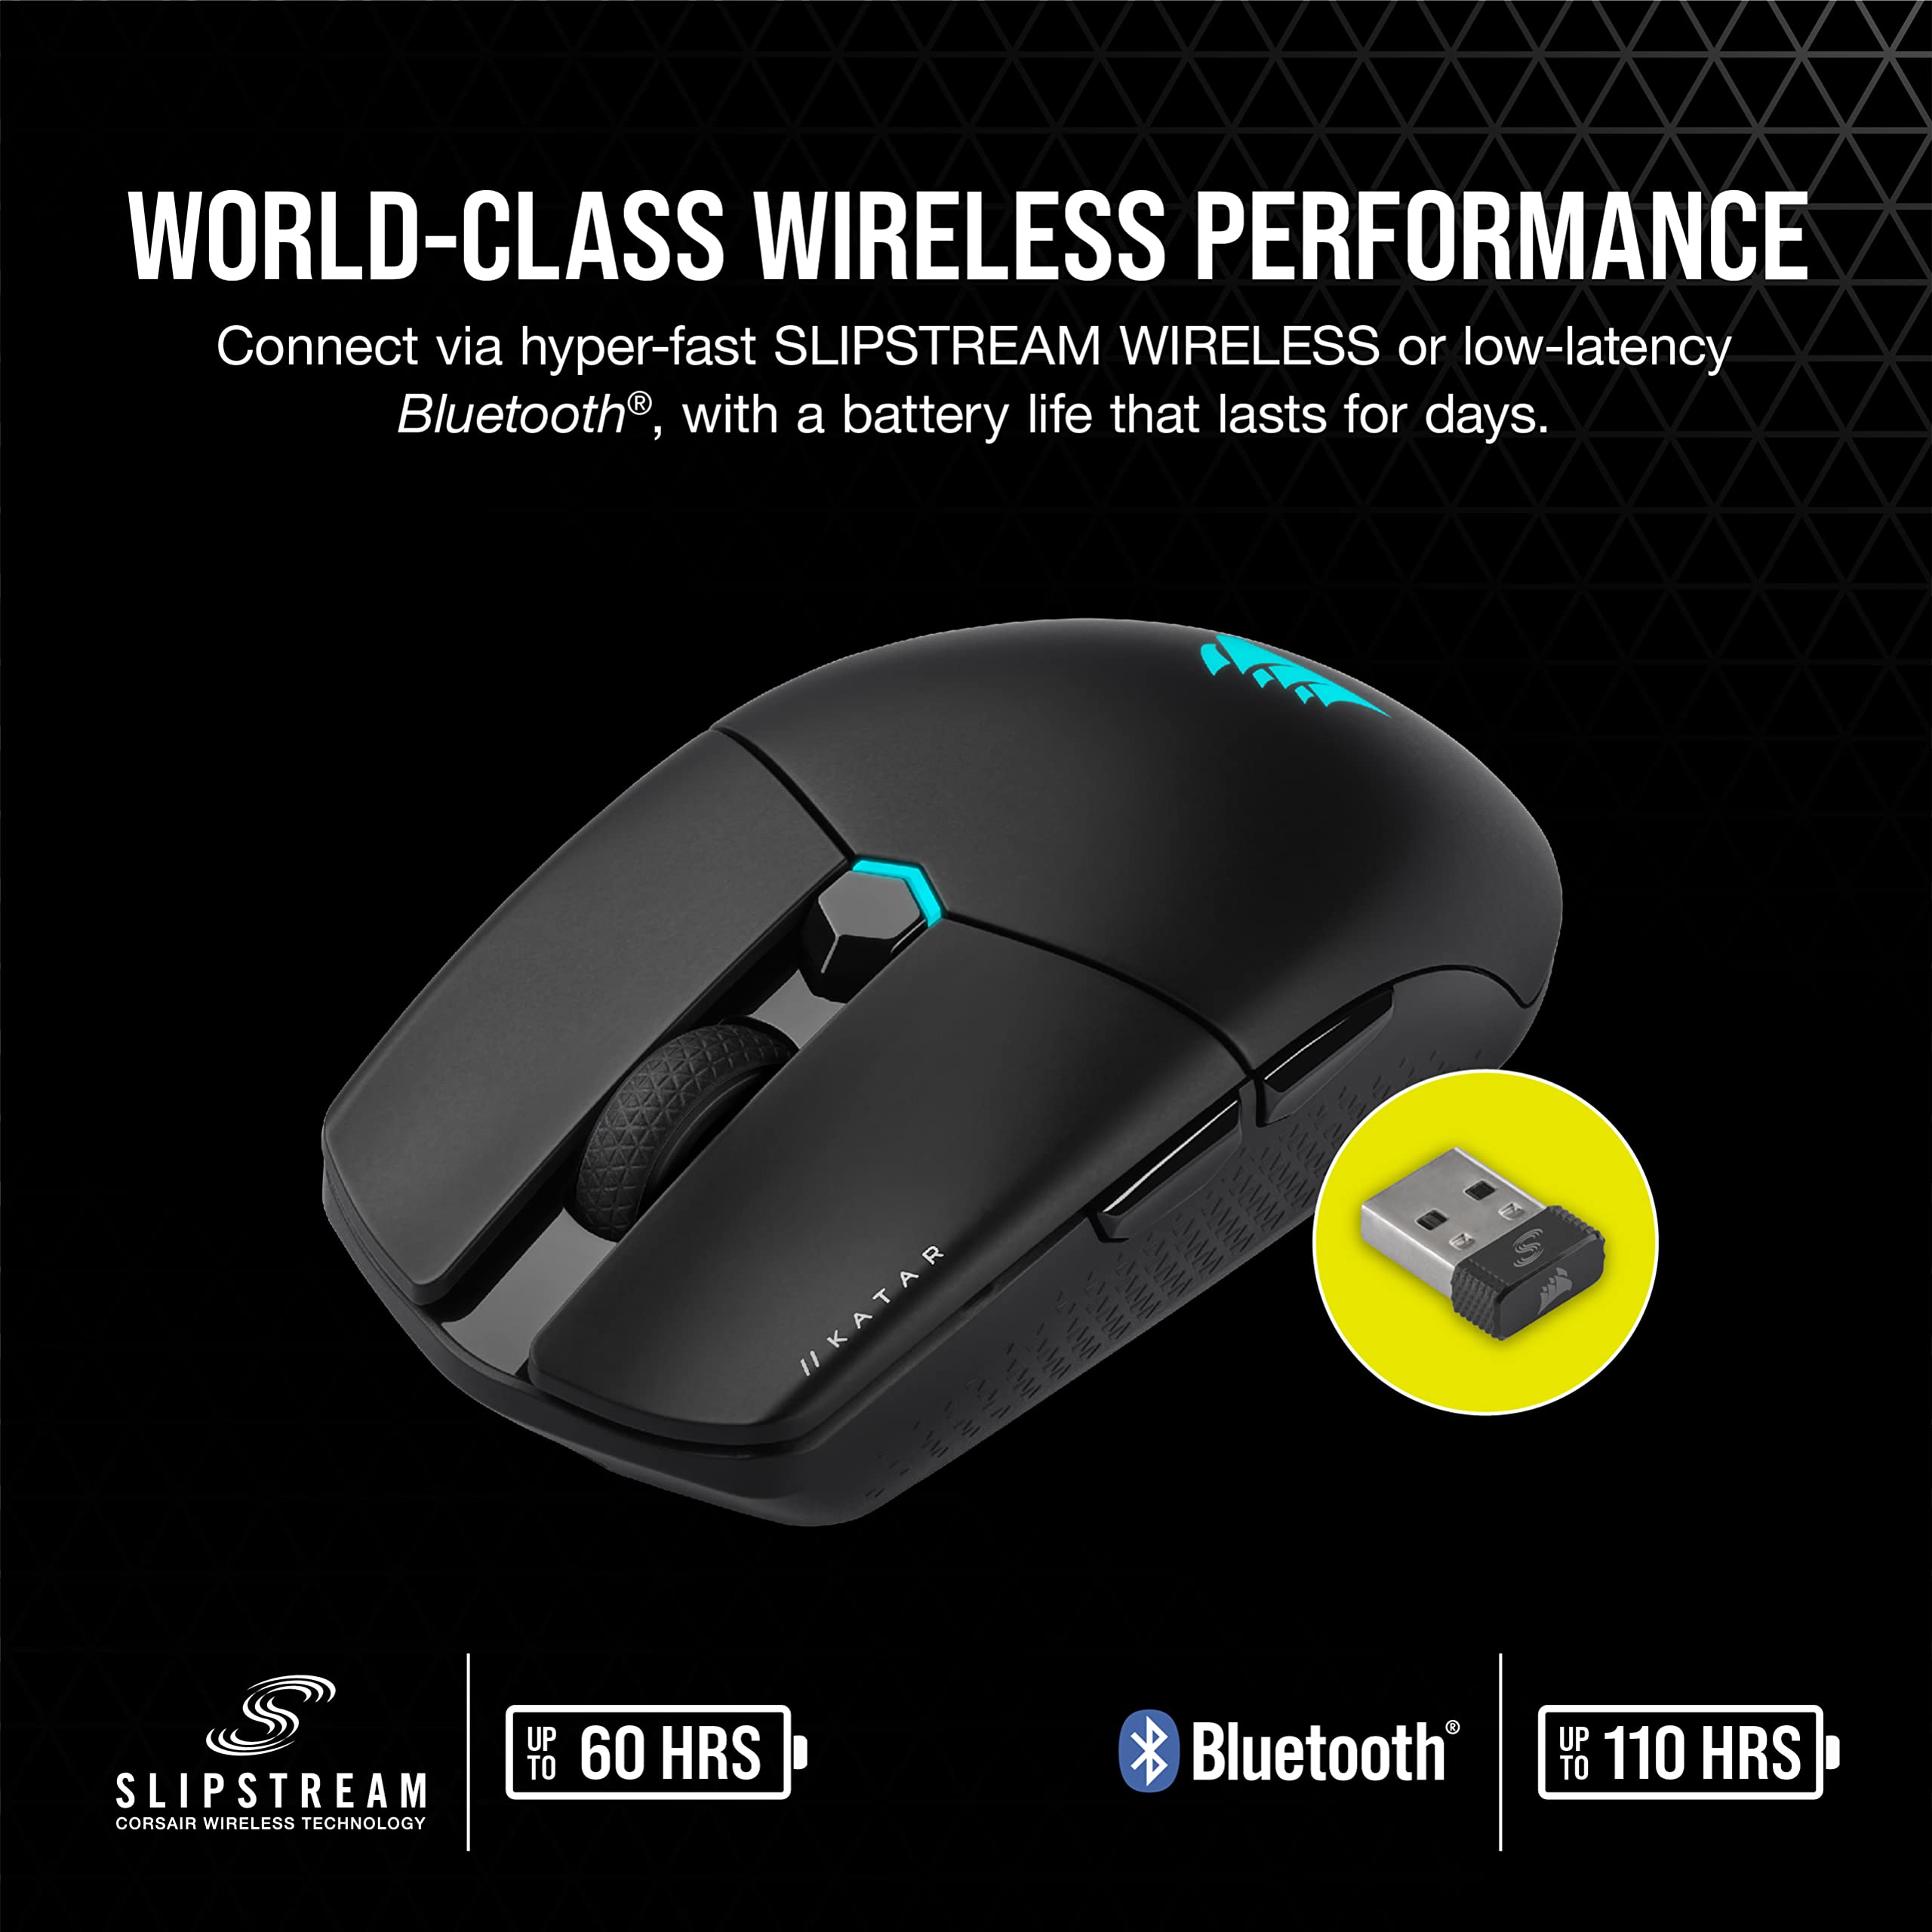 Corsair KATAR Elite Wireless Gaming Mouse - Ultra Lightweight, Marksman 26,000 DPI Optical Sensor, Sub-1ms Slipstream Wireless Connection, Up to 110 Hours of Rechargeable Battery Life - Black